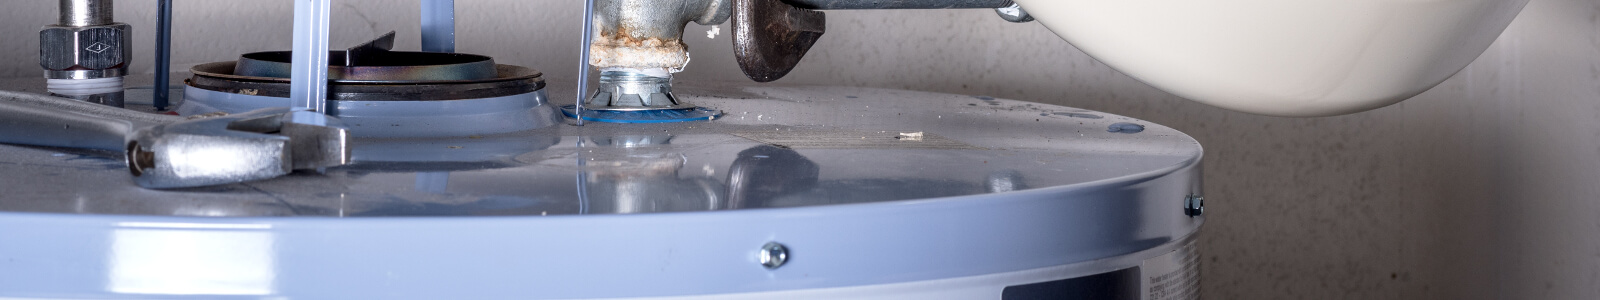 Water Heater Installation, Replacement, & Repair Services